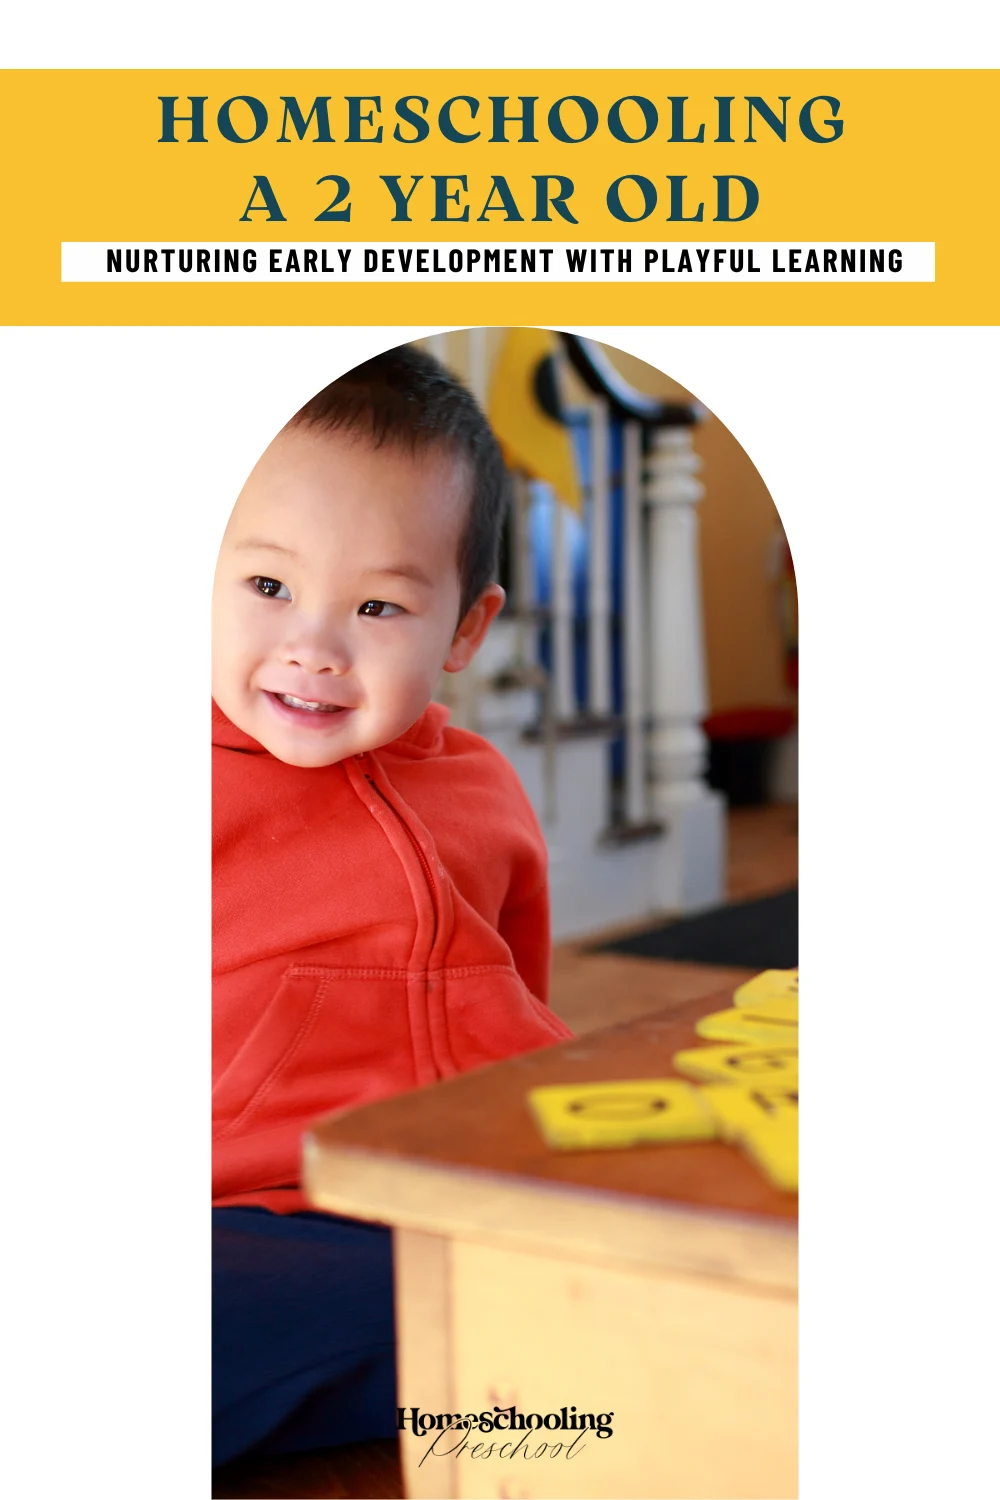 Homeschooling a 2 Year Old: Nurturing Early Development with Playful Learning